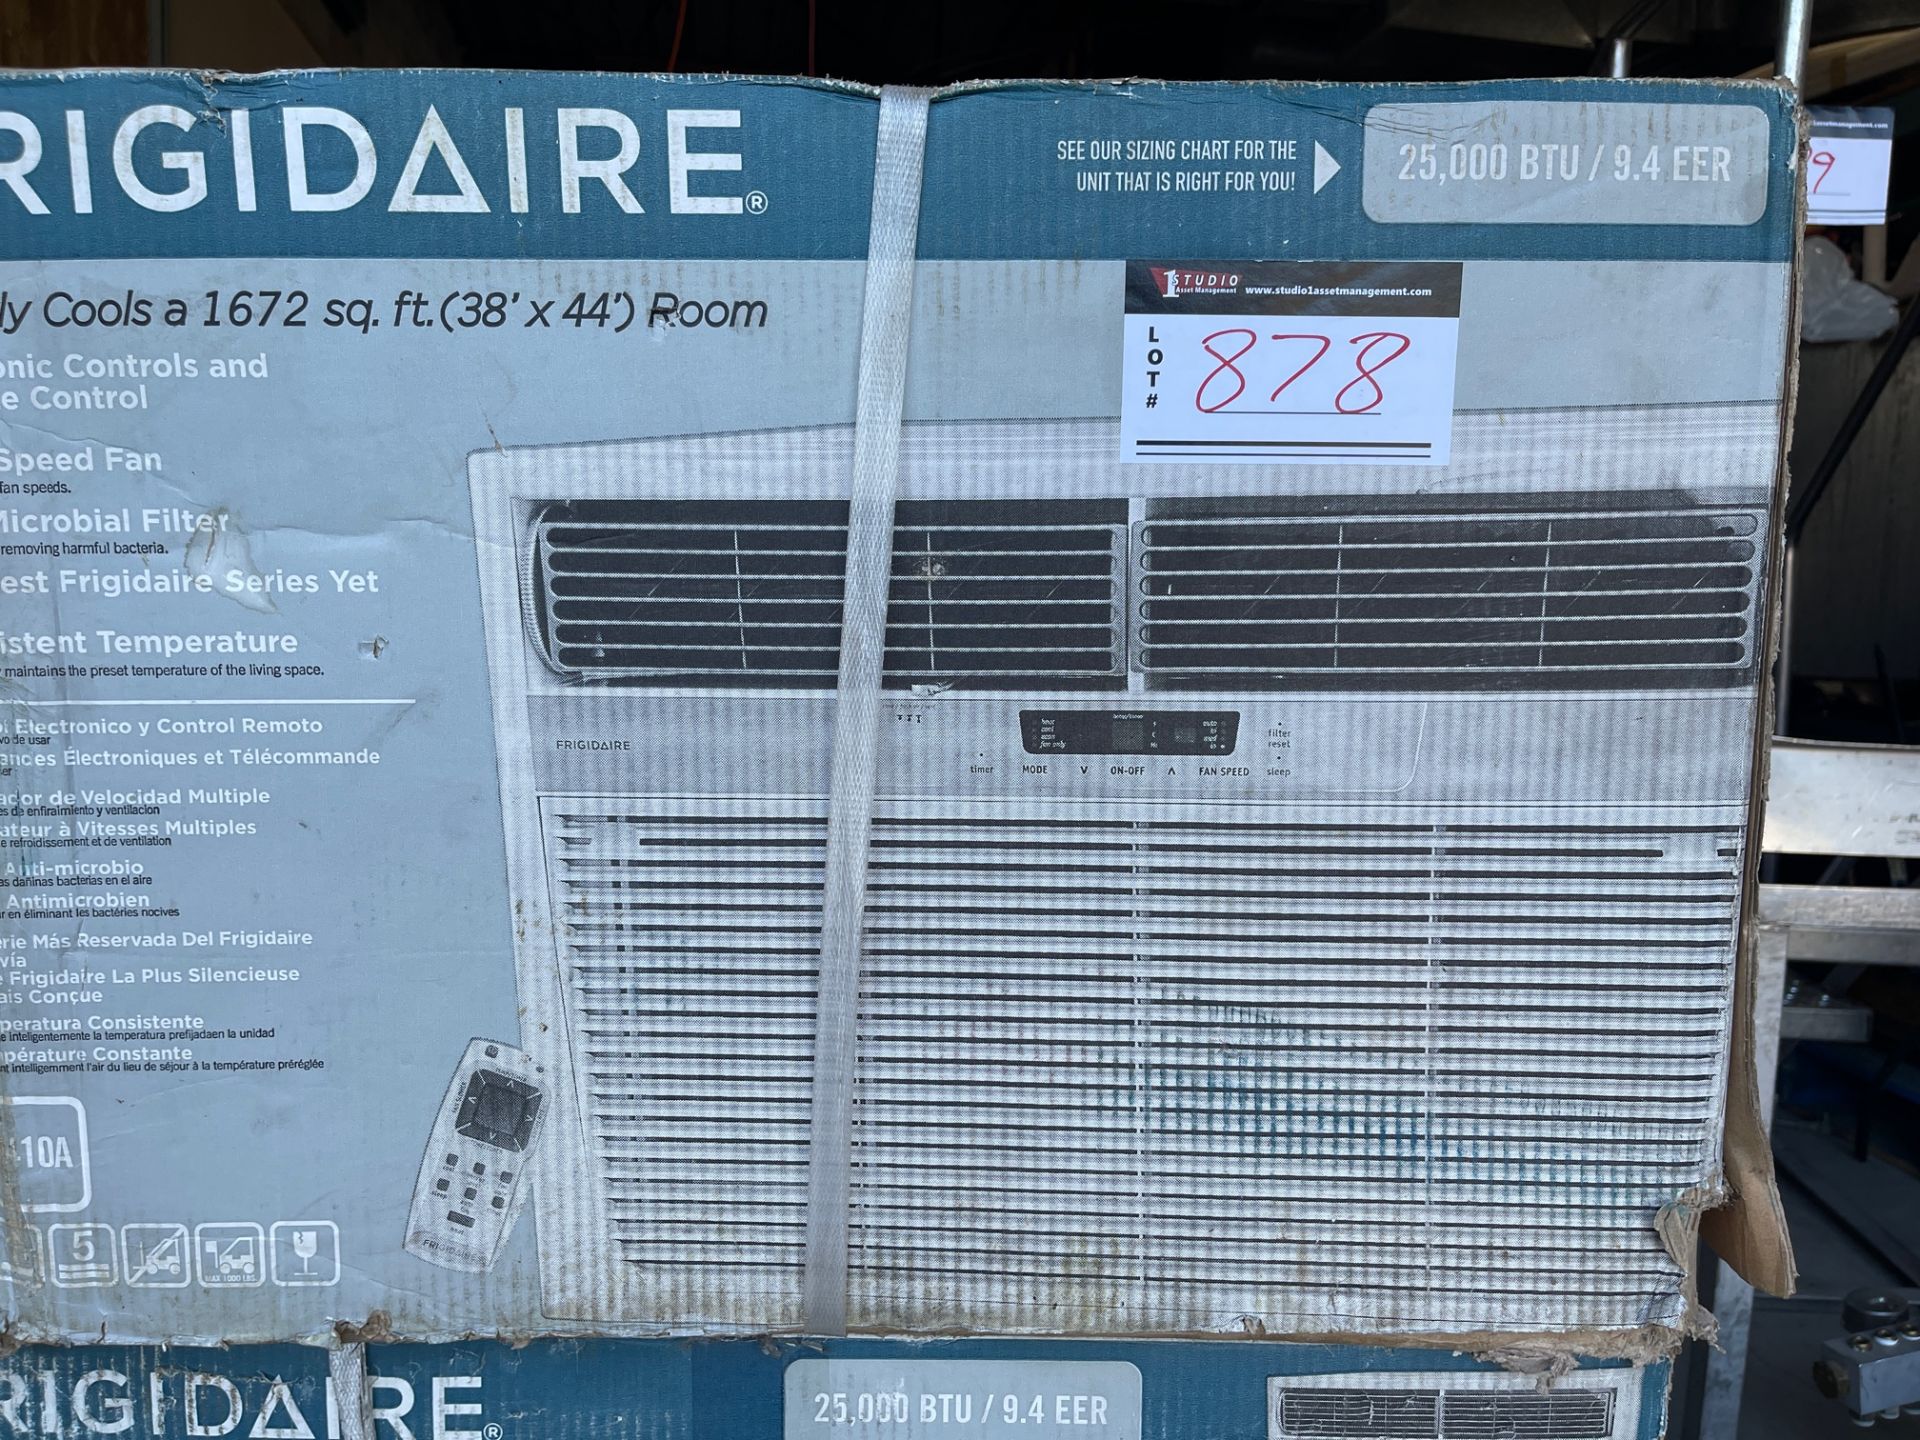 FRIGIDAIRE AIR CONDITIONER, MODEL R410 A, BRAND NEW IN THE BOX